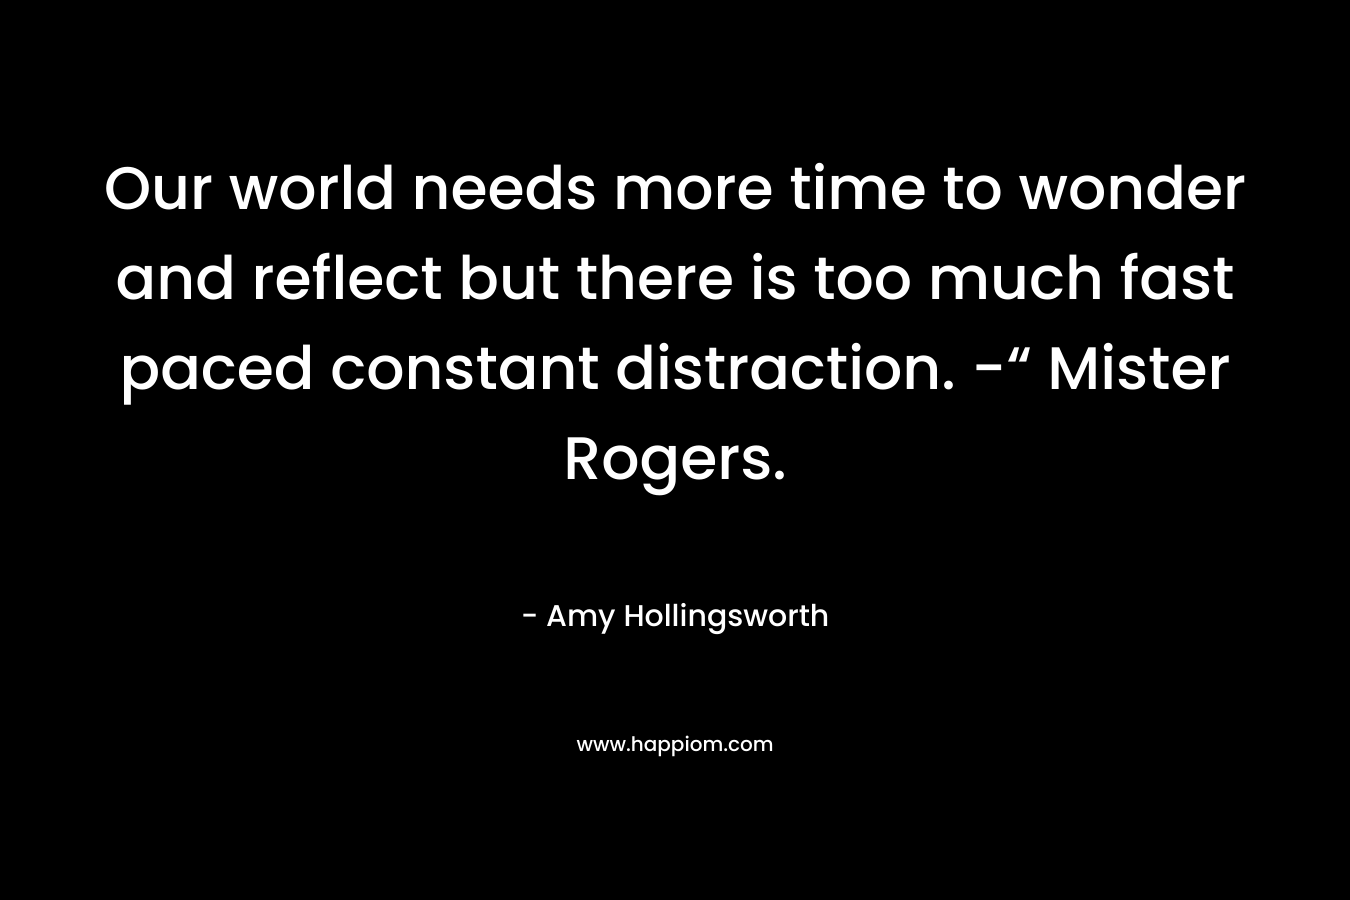 Our world needs more time to wonder and reflect but there is too much fast paced constant distraction. -“ Mister Rogers. – Amy Hollingsworth